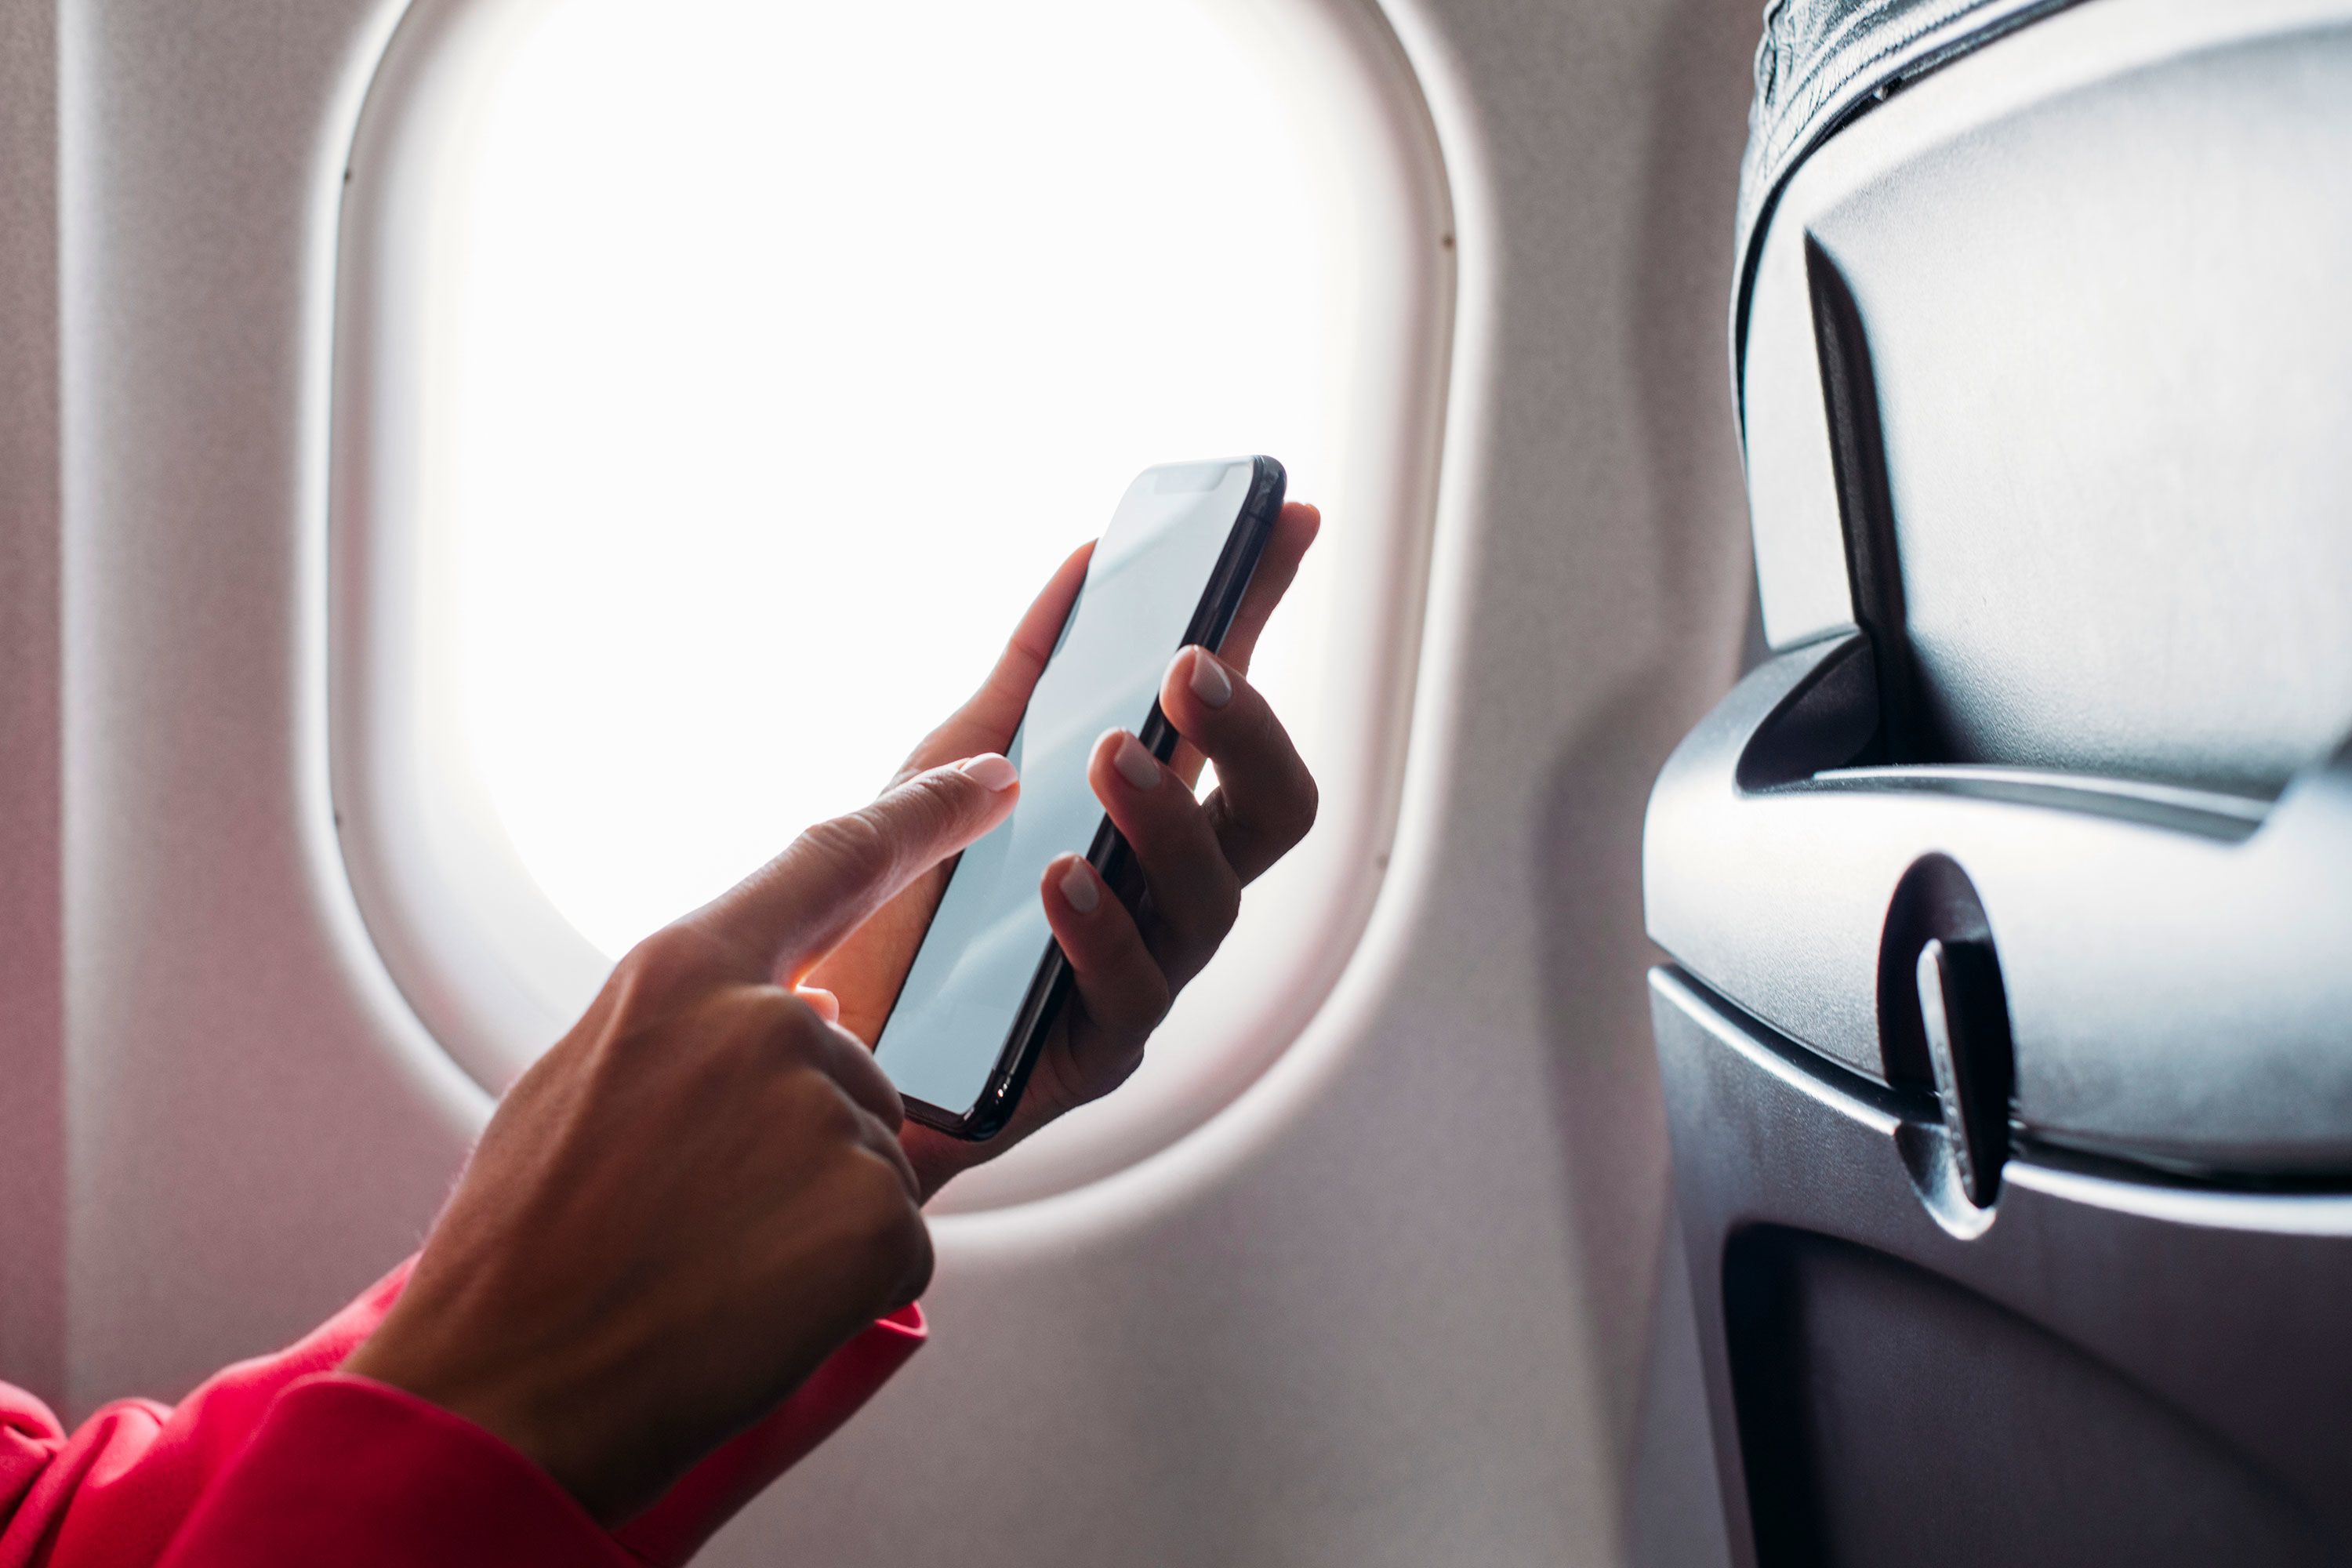 Why mobile phones and electronic devices are put on Airplane mode